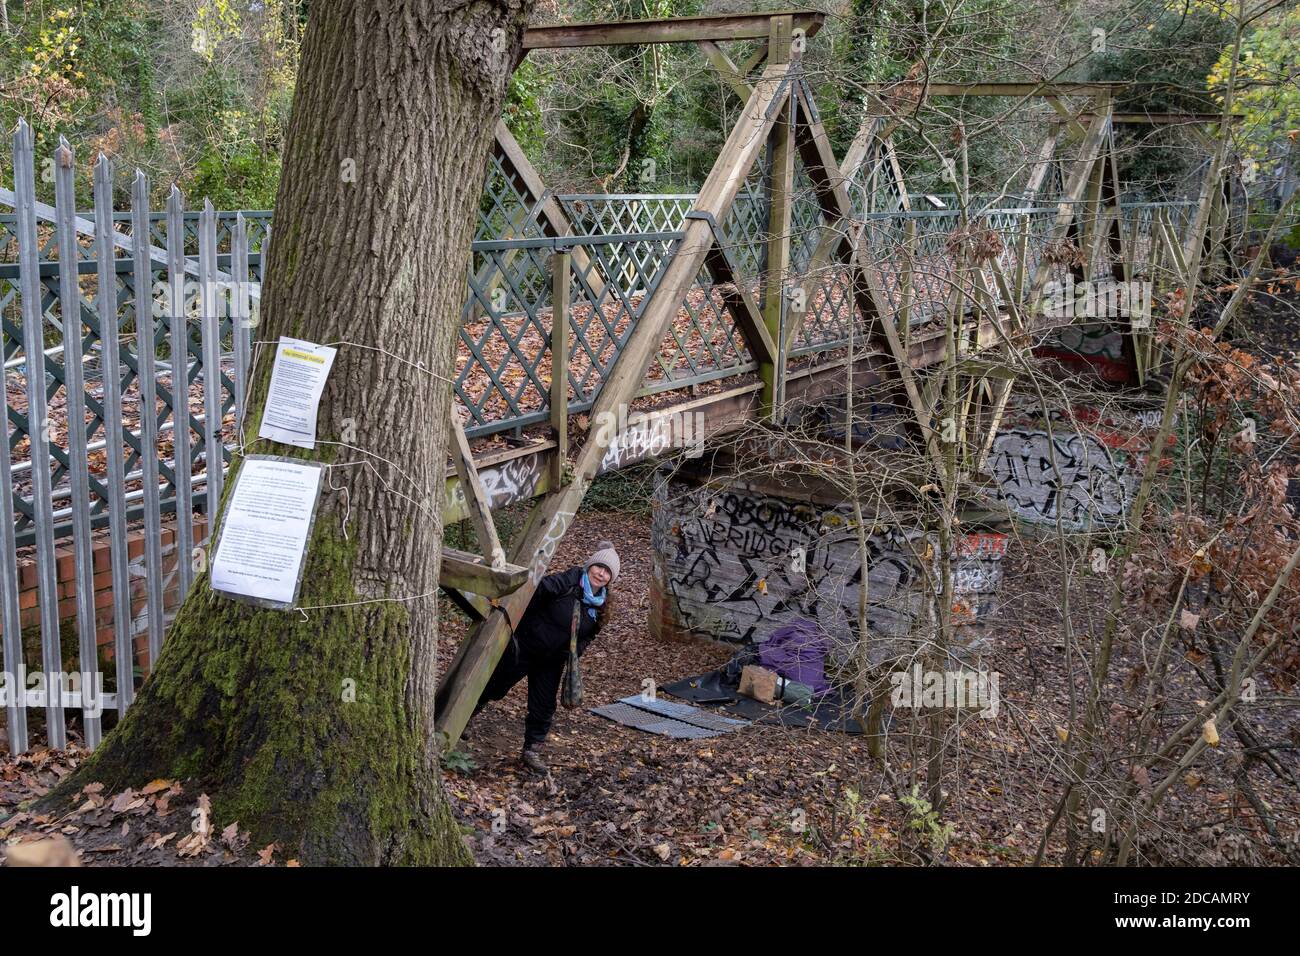 An activist against the proposed felling of two 100+ year-old oak trees, occupies the site under  'Pissarro's' footbridge whose renovation has been deemed necessary by the Southwark Council , on 17th November 2020, in London, England. The Nunhead to Crystal Palace (High Level) railway once passed through the Wood and Impressionist artist Camille Pissarro (1830–1903) famously painted a railway landscape from the bridge in the 1870s. Sydenham Hill Wood forms part of the largest remaining tract of the old Great North Wood, a vast area of worked coppices and wooded commons that once stretched acro Stock Photo